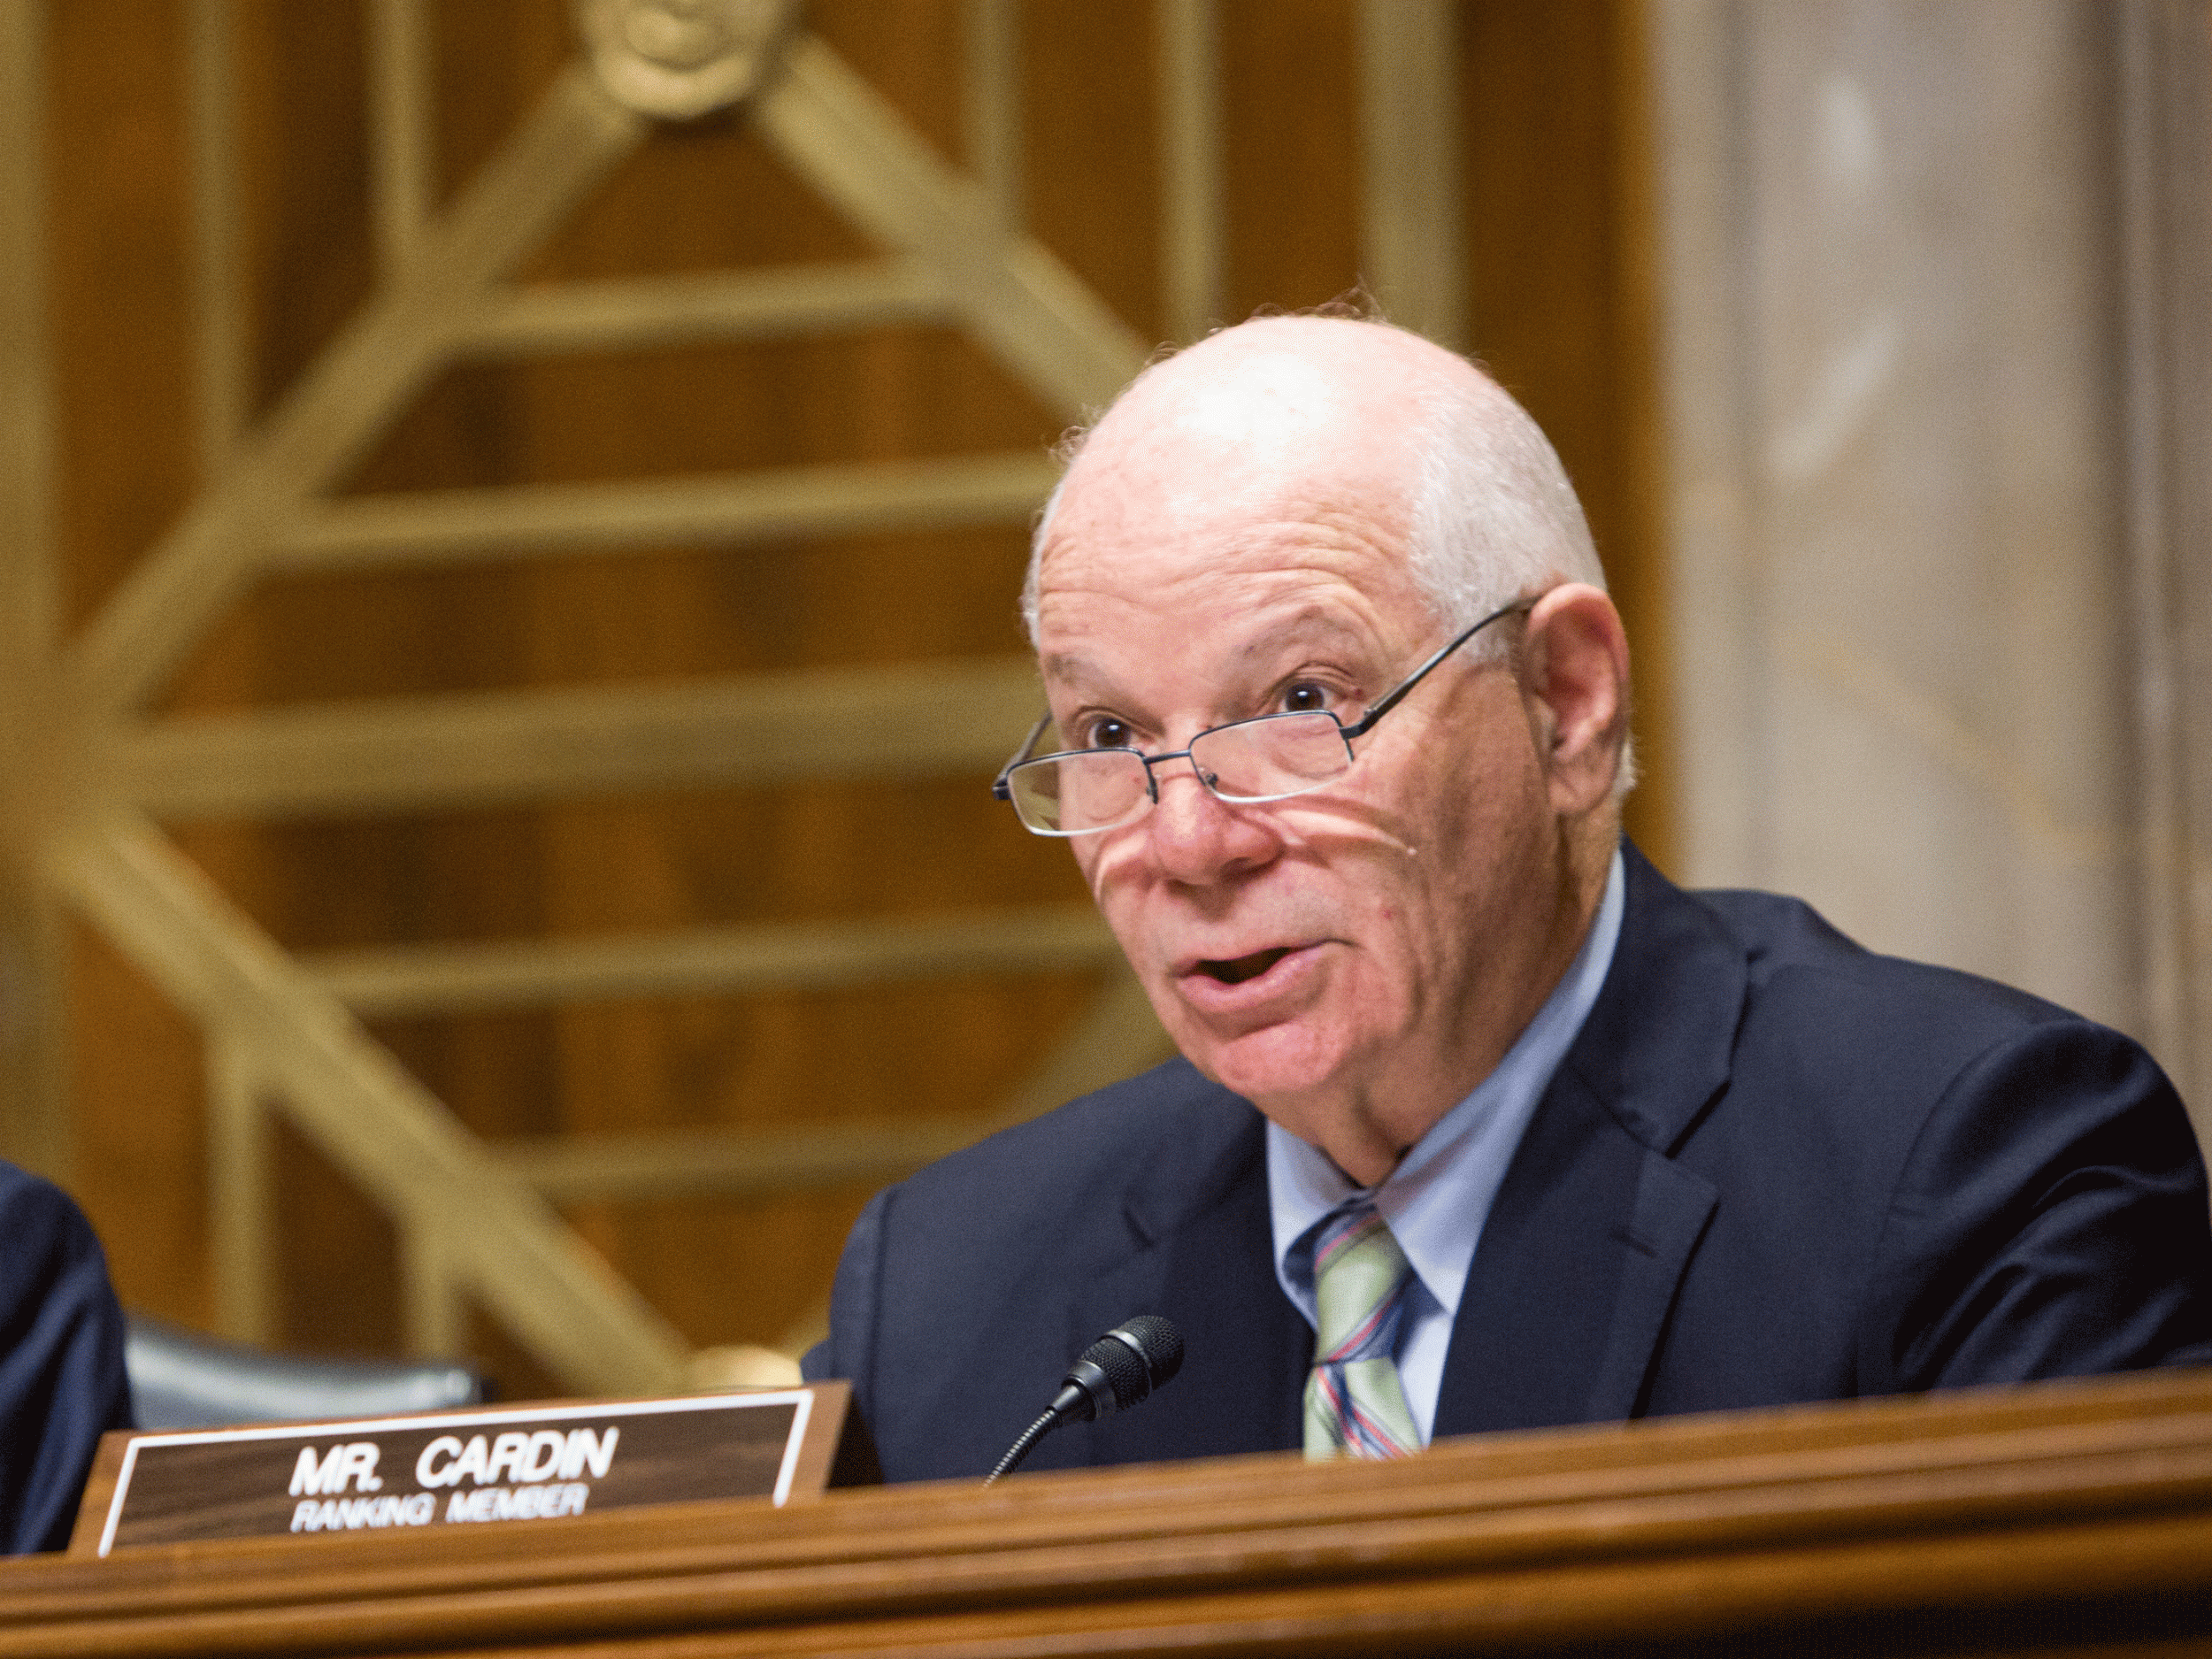 Senator Cardin plans to introduce his idea this week Getty